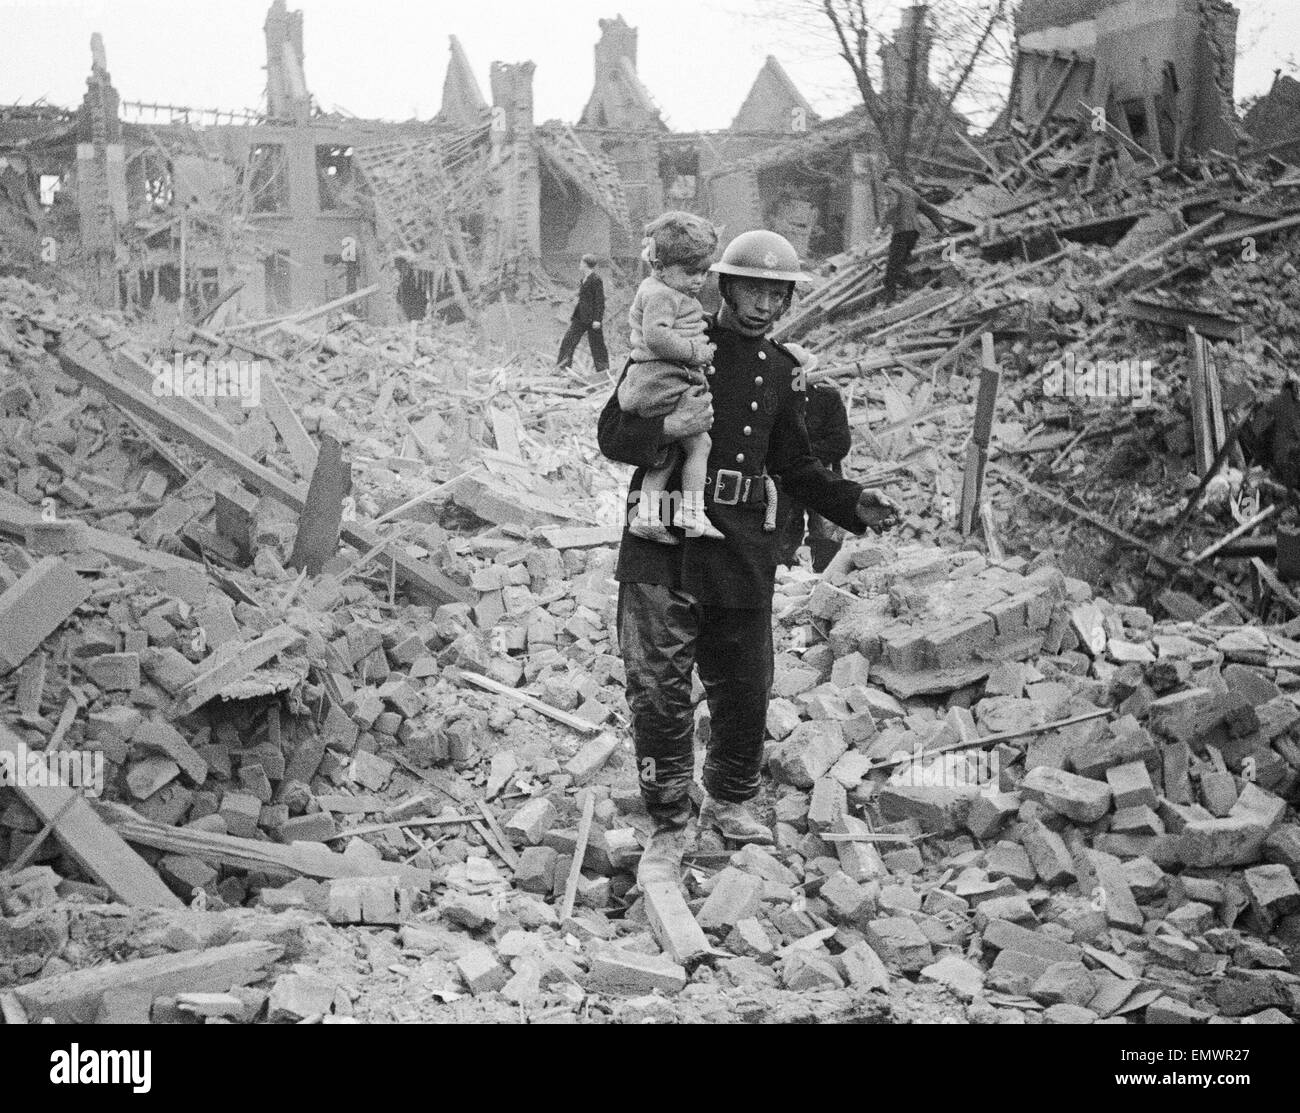 A fireman carries a young boy out of the rubble after a bombing raid. Stock Photo